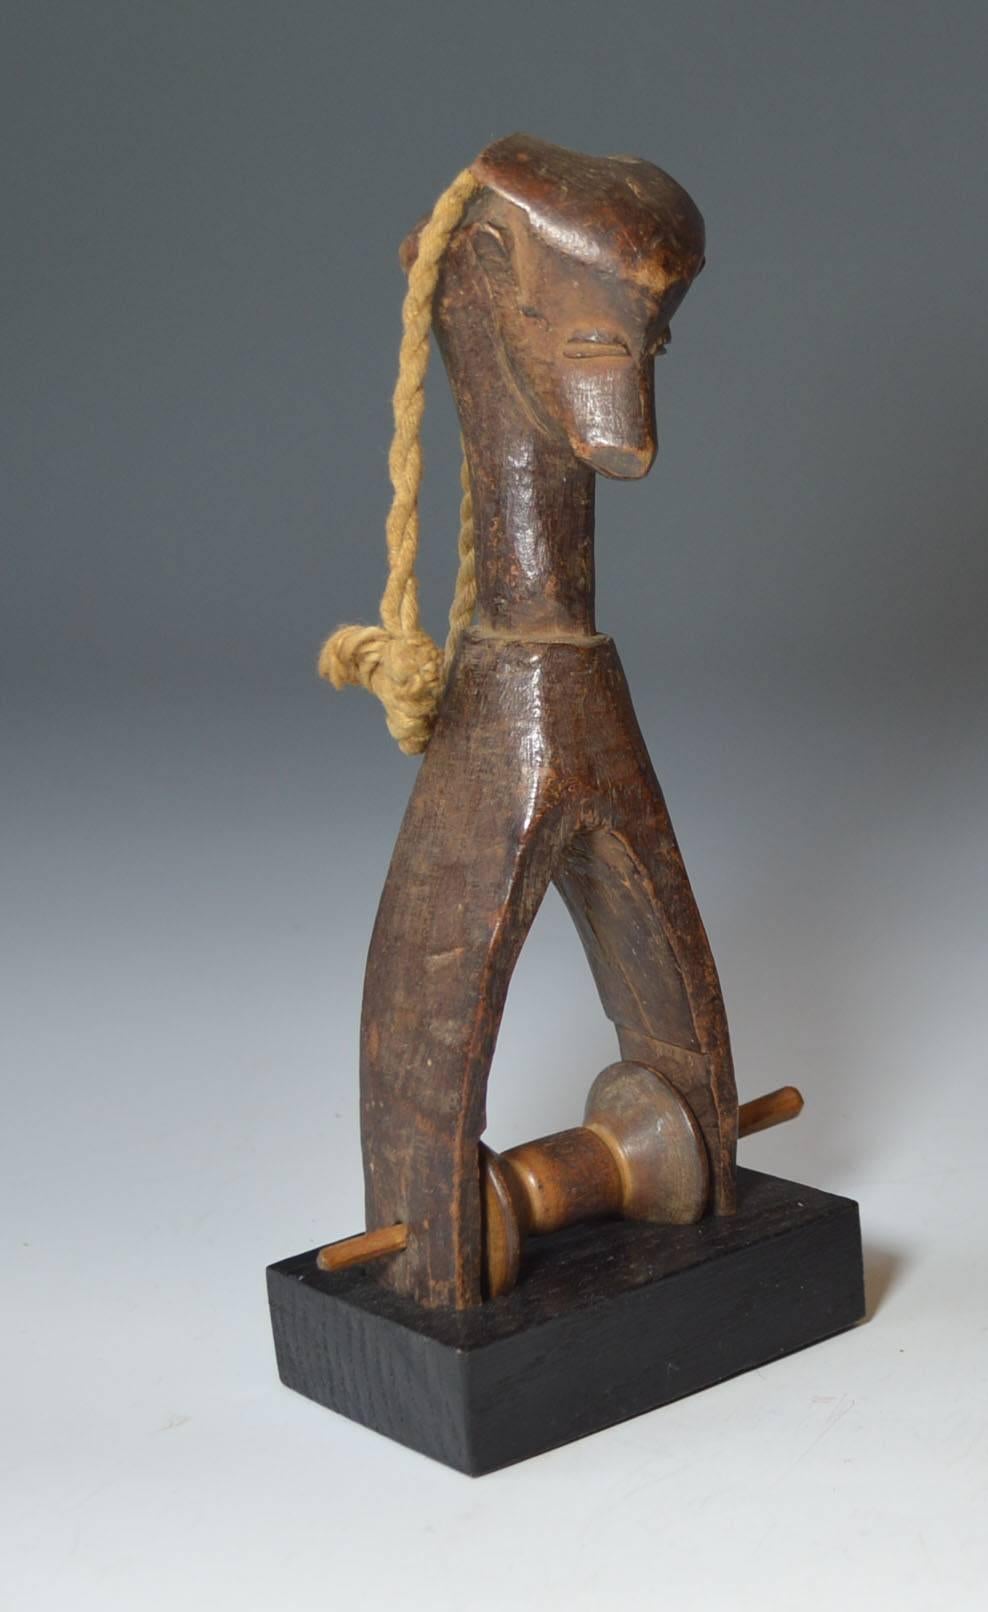 A fine Senufo heddle pulley
A antelope loom head pulley, these small pulleys are used for weaving strips of material which are sewn together into large cloths
Ex Hans Schleger collection acquired Sotheby’s, 1968
Senufo Ivory Coast
Period early